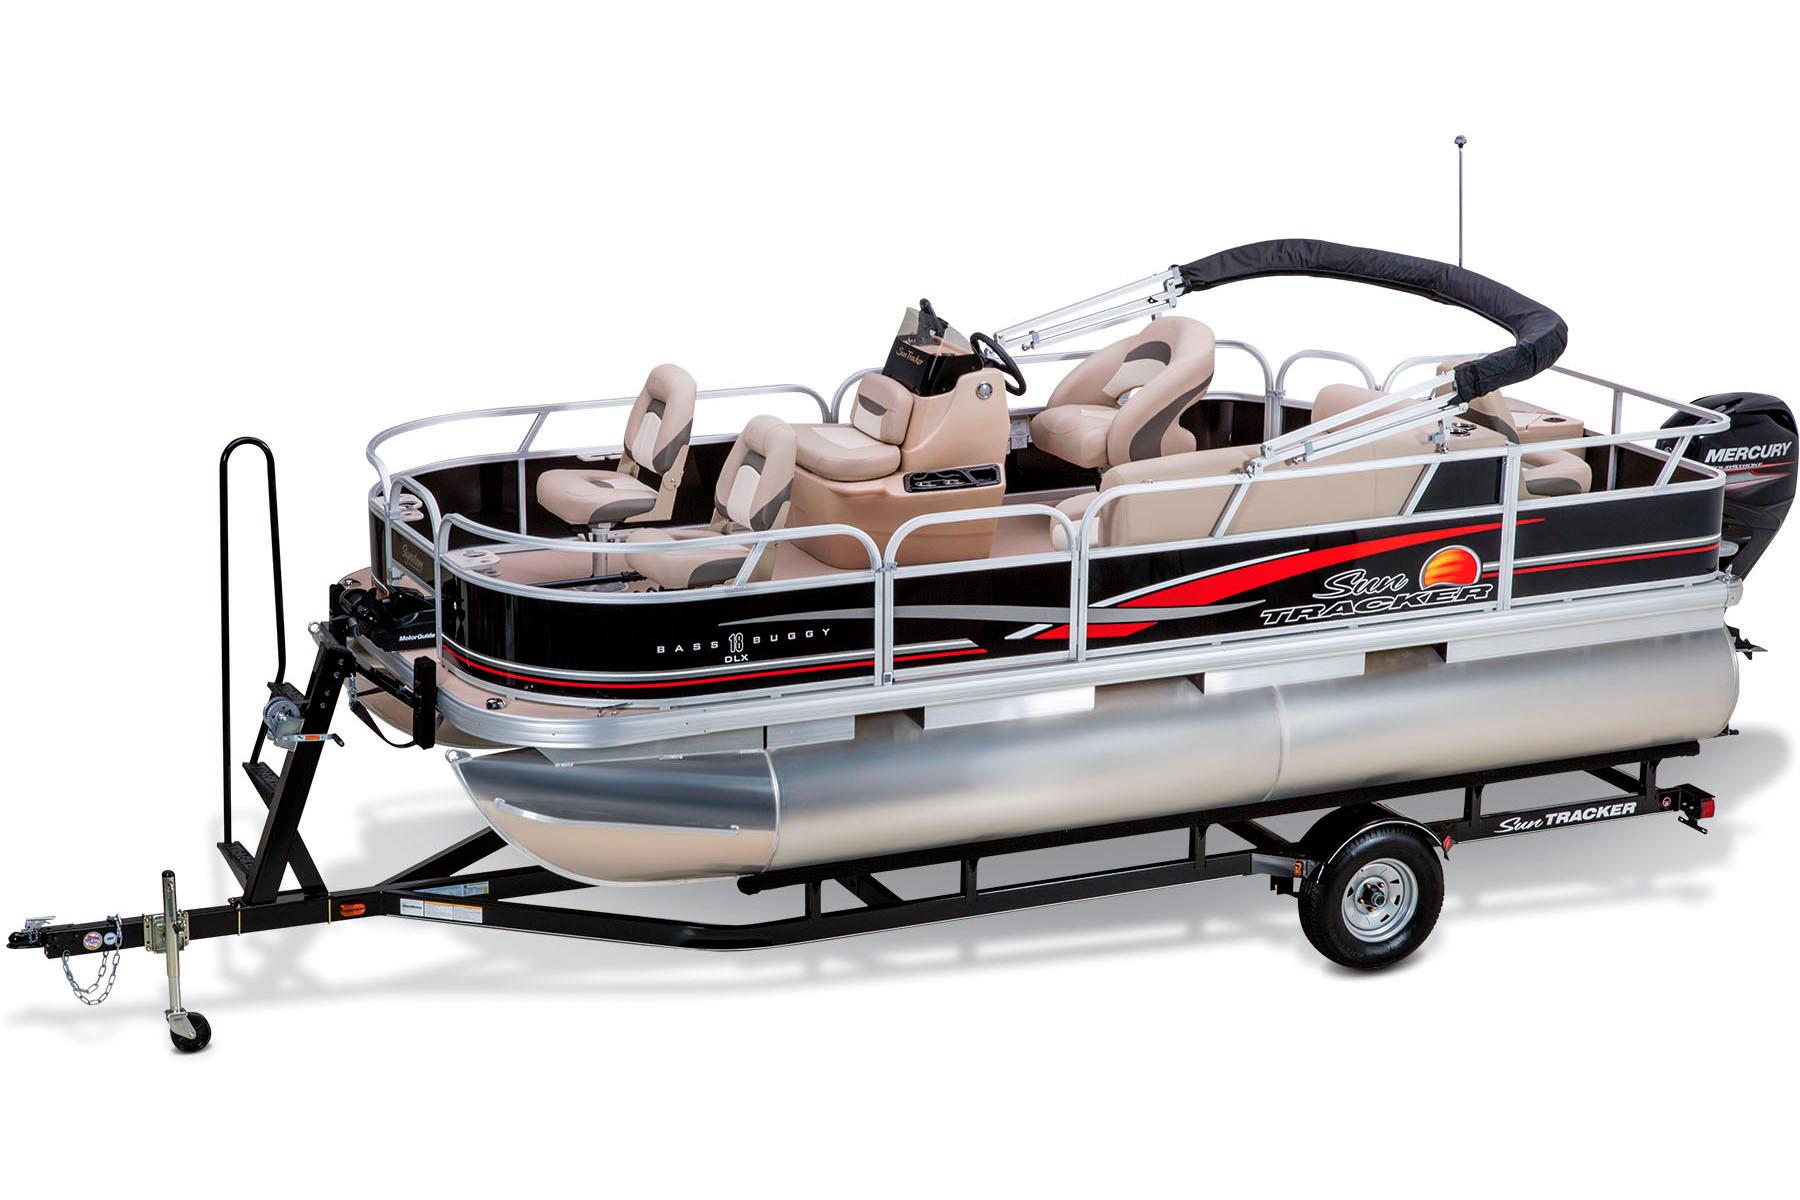 Sun Tracker Bass Buggy 18 DLX Pontoon Boats New in Concord, NC, 28027